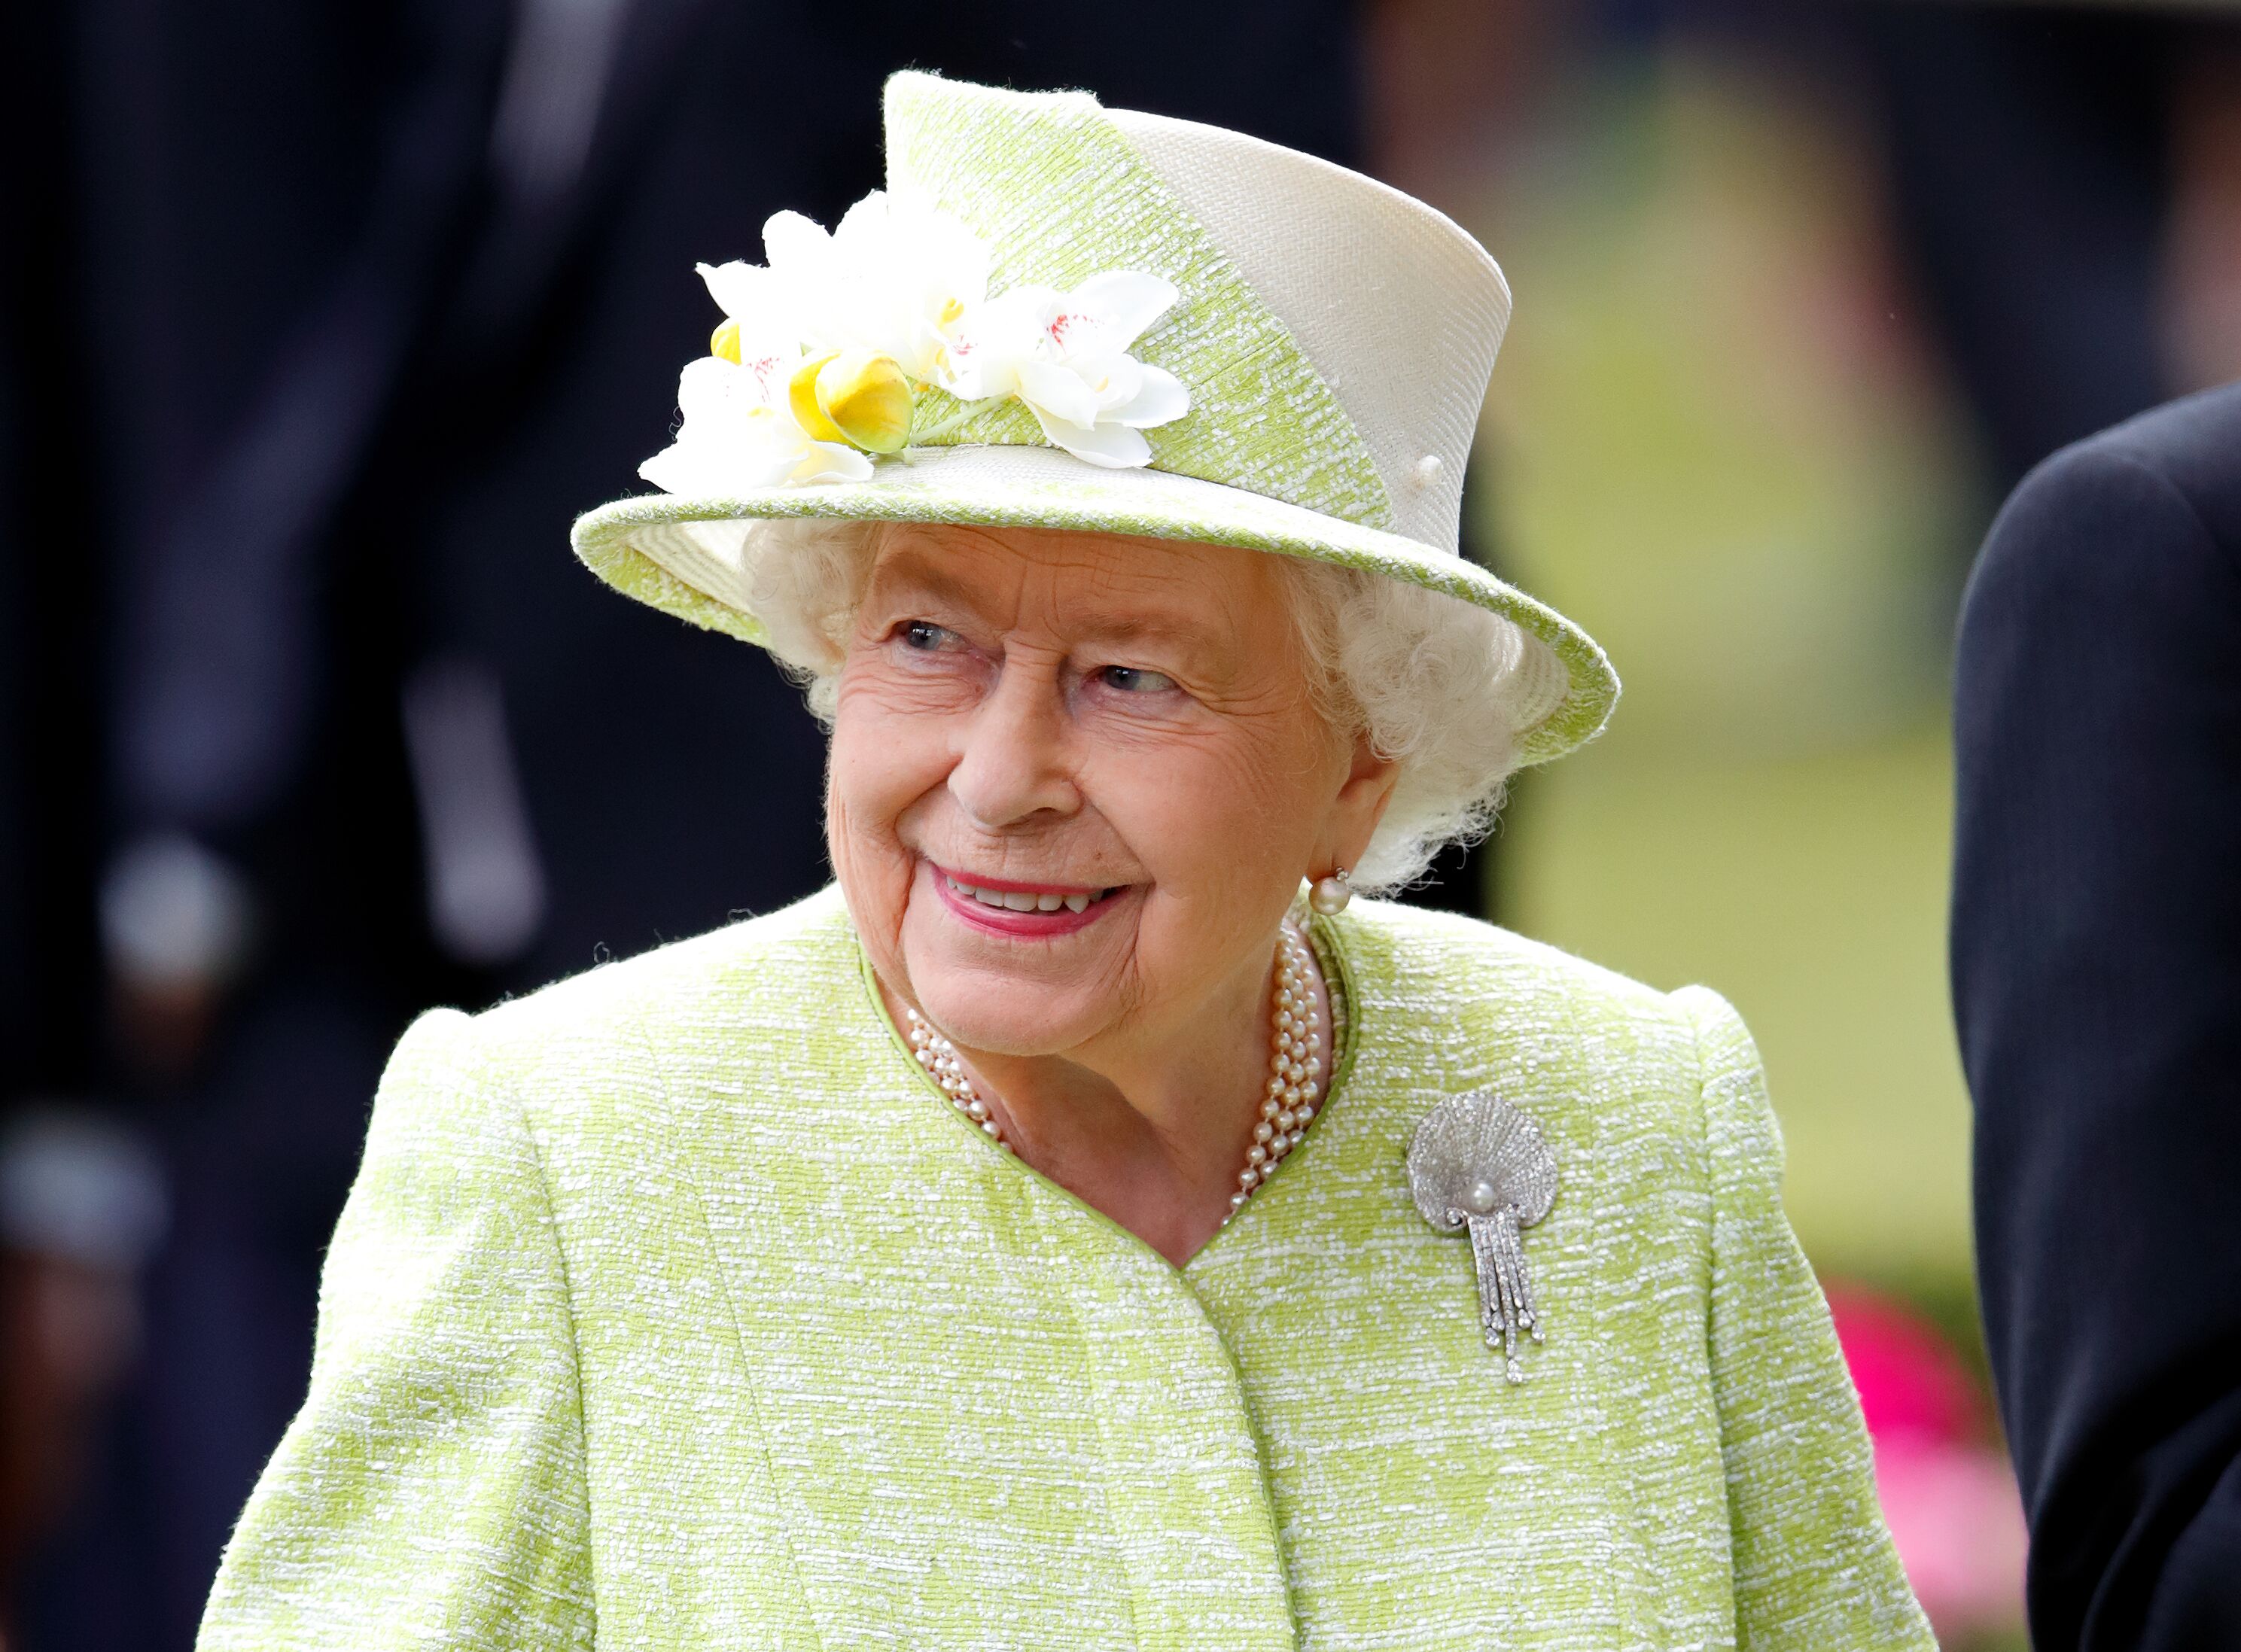 Queen Elizabeth II attends day five of Royal Ascot at Ascot Racecourse on June 22, 2019 | Photo: Getty Images